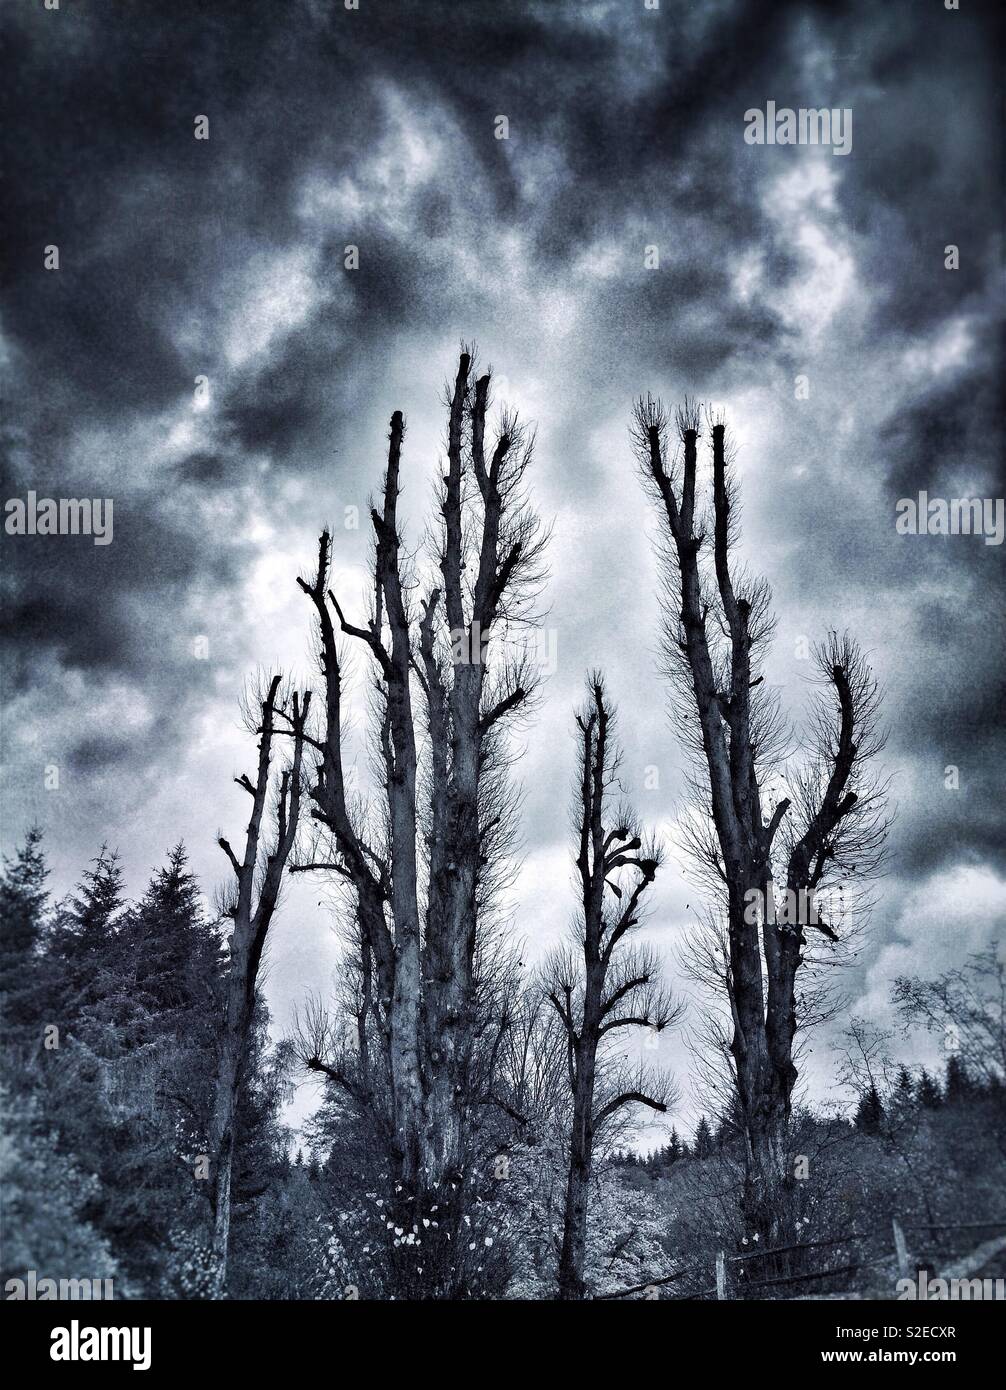 Sinister winter trees with a threatening stormy sky Stock Photo